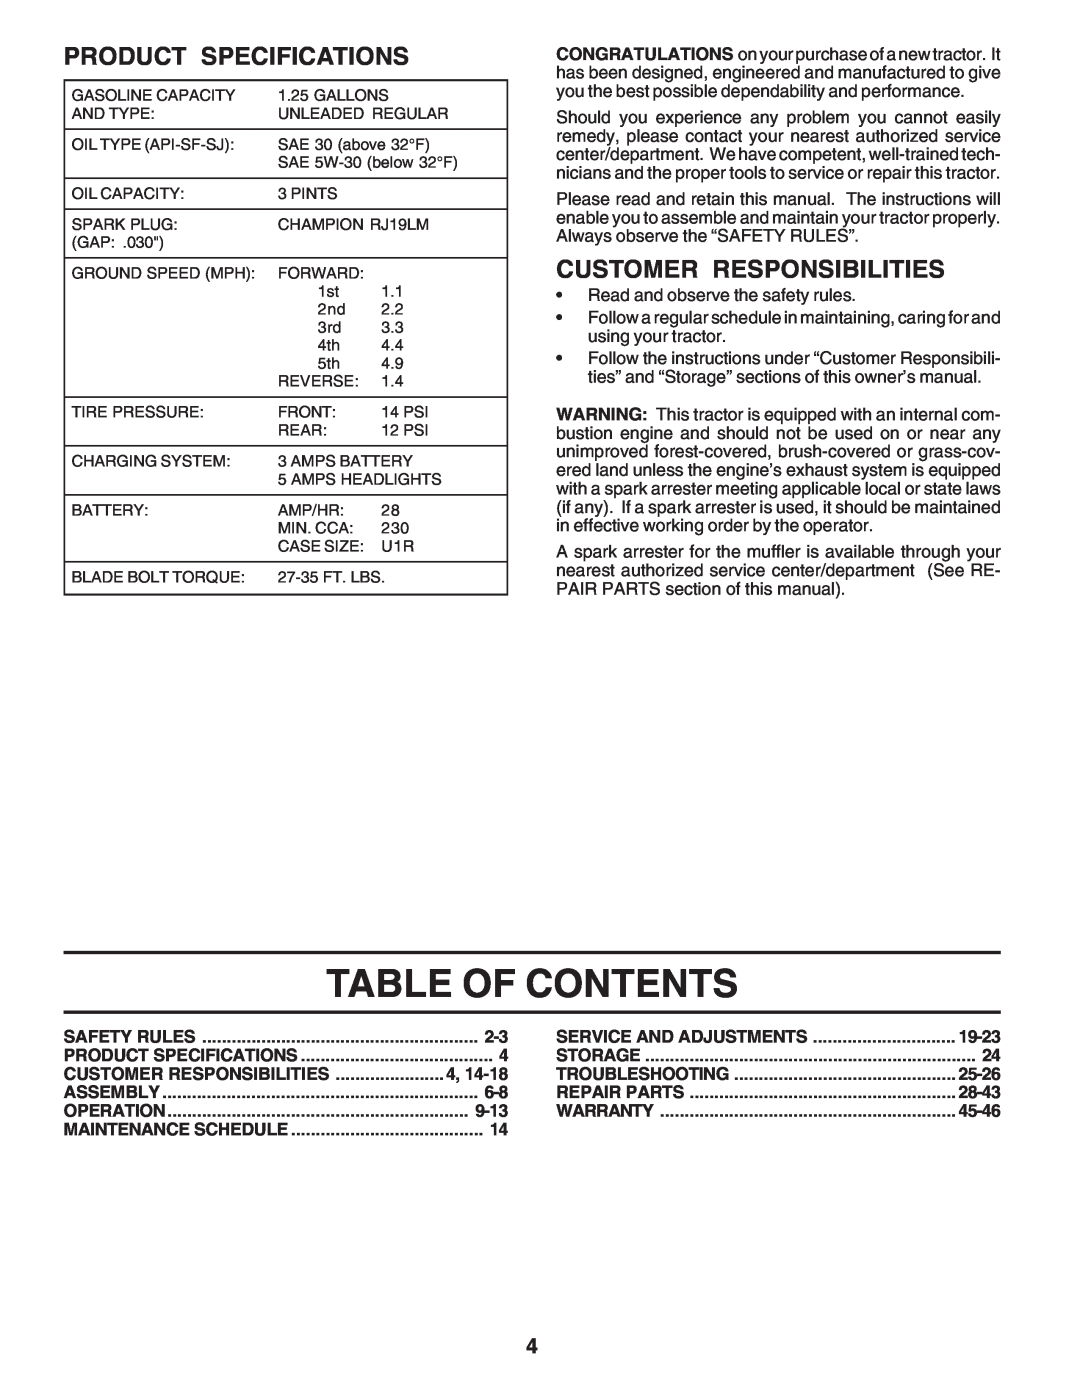 Weed Eater WE12538K manual Table Of Contents, Product Specifications, Customer Responsibilities 